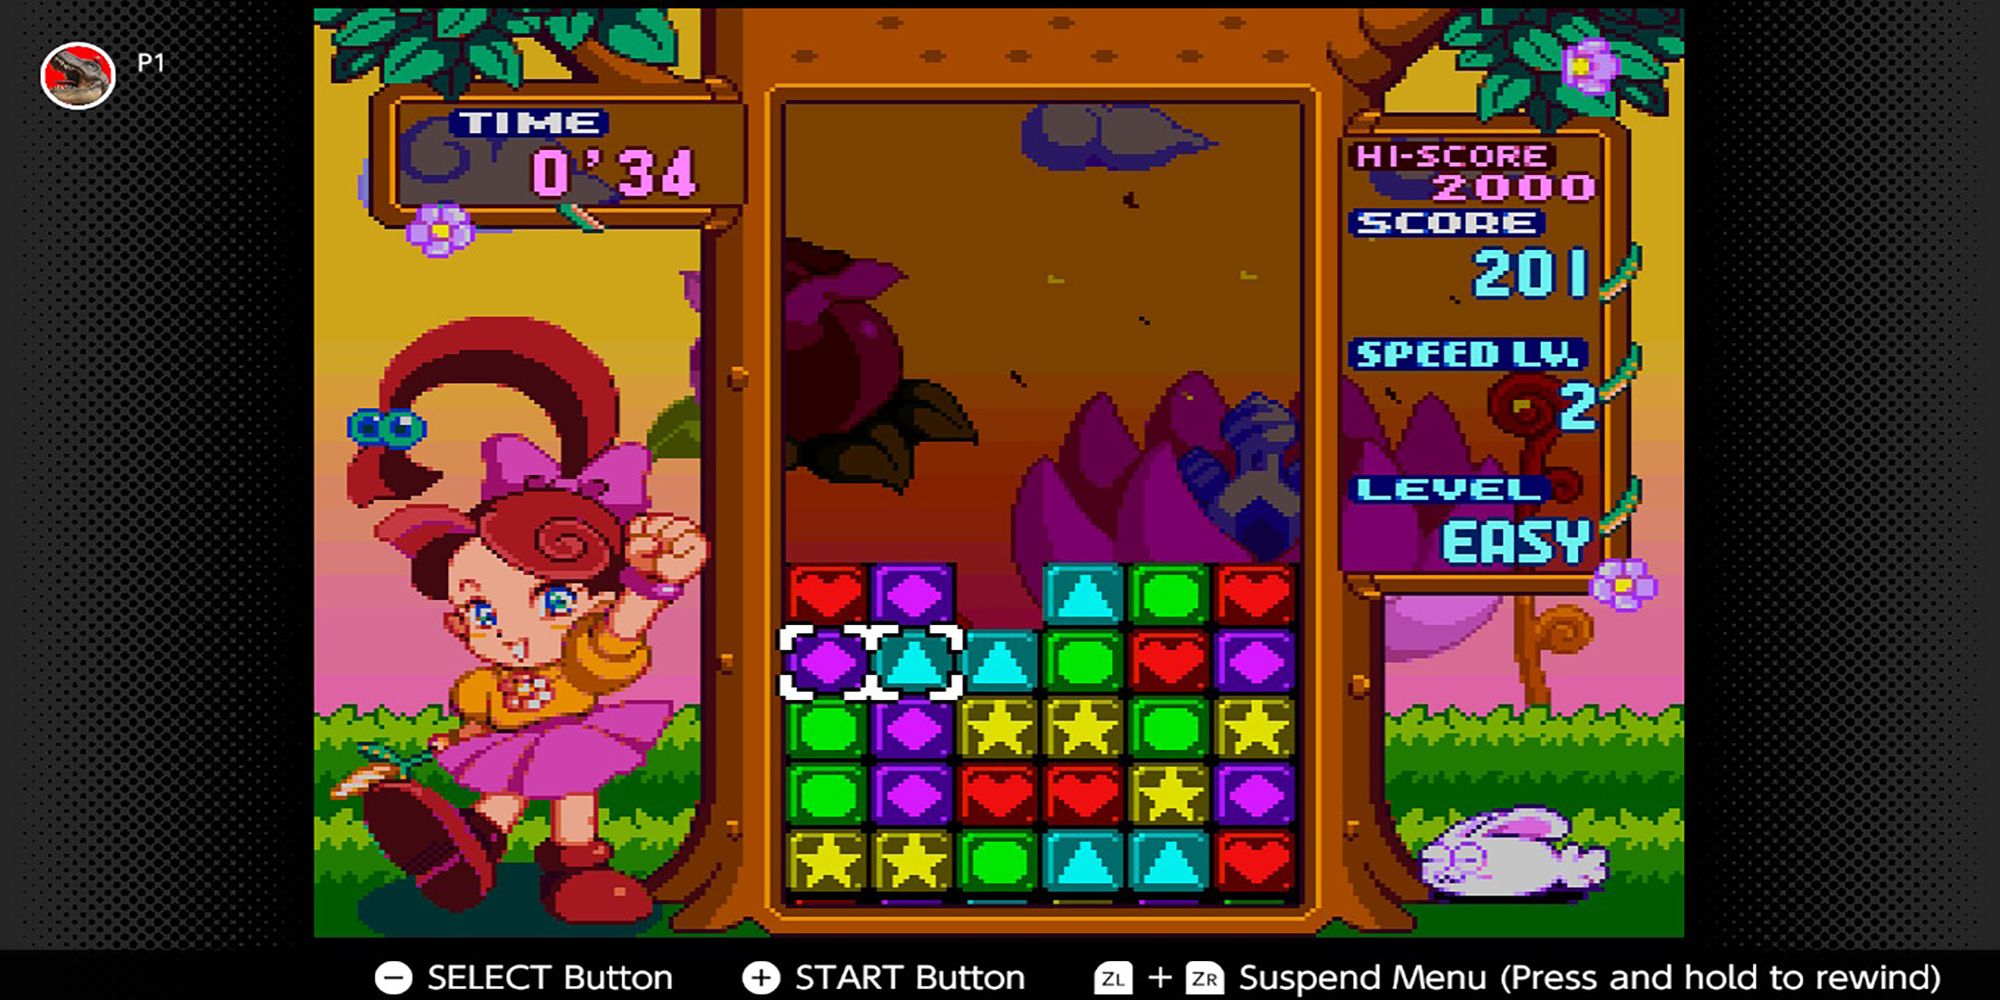 An enthusiastic fairy cheers on the player in a marathon game of Panel de Pon.